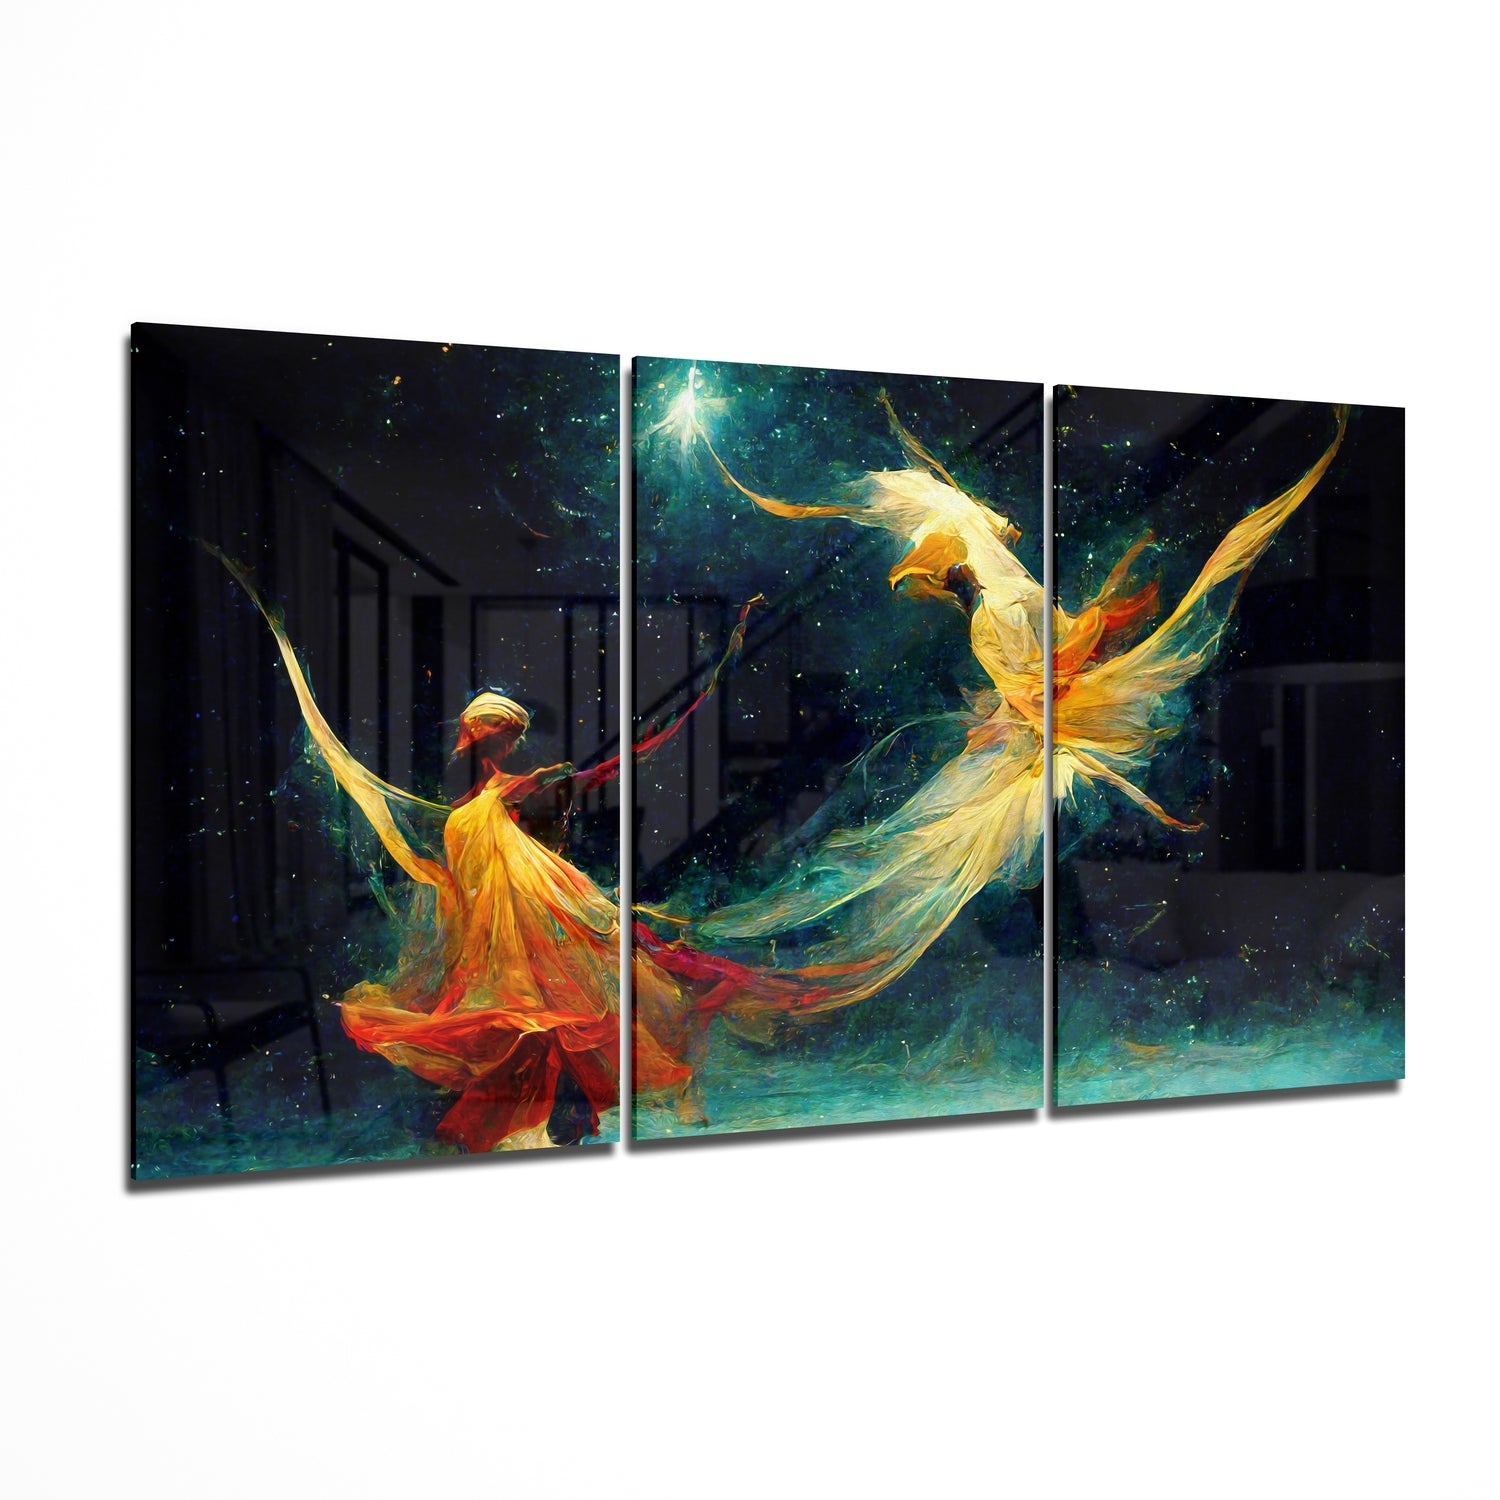 Whirling Glass Wall Art